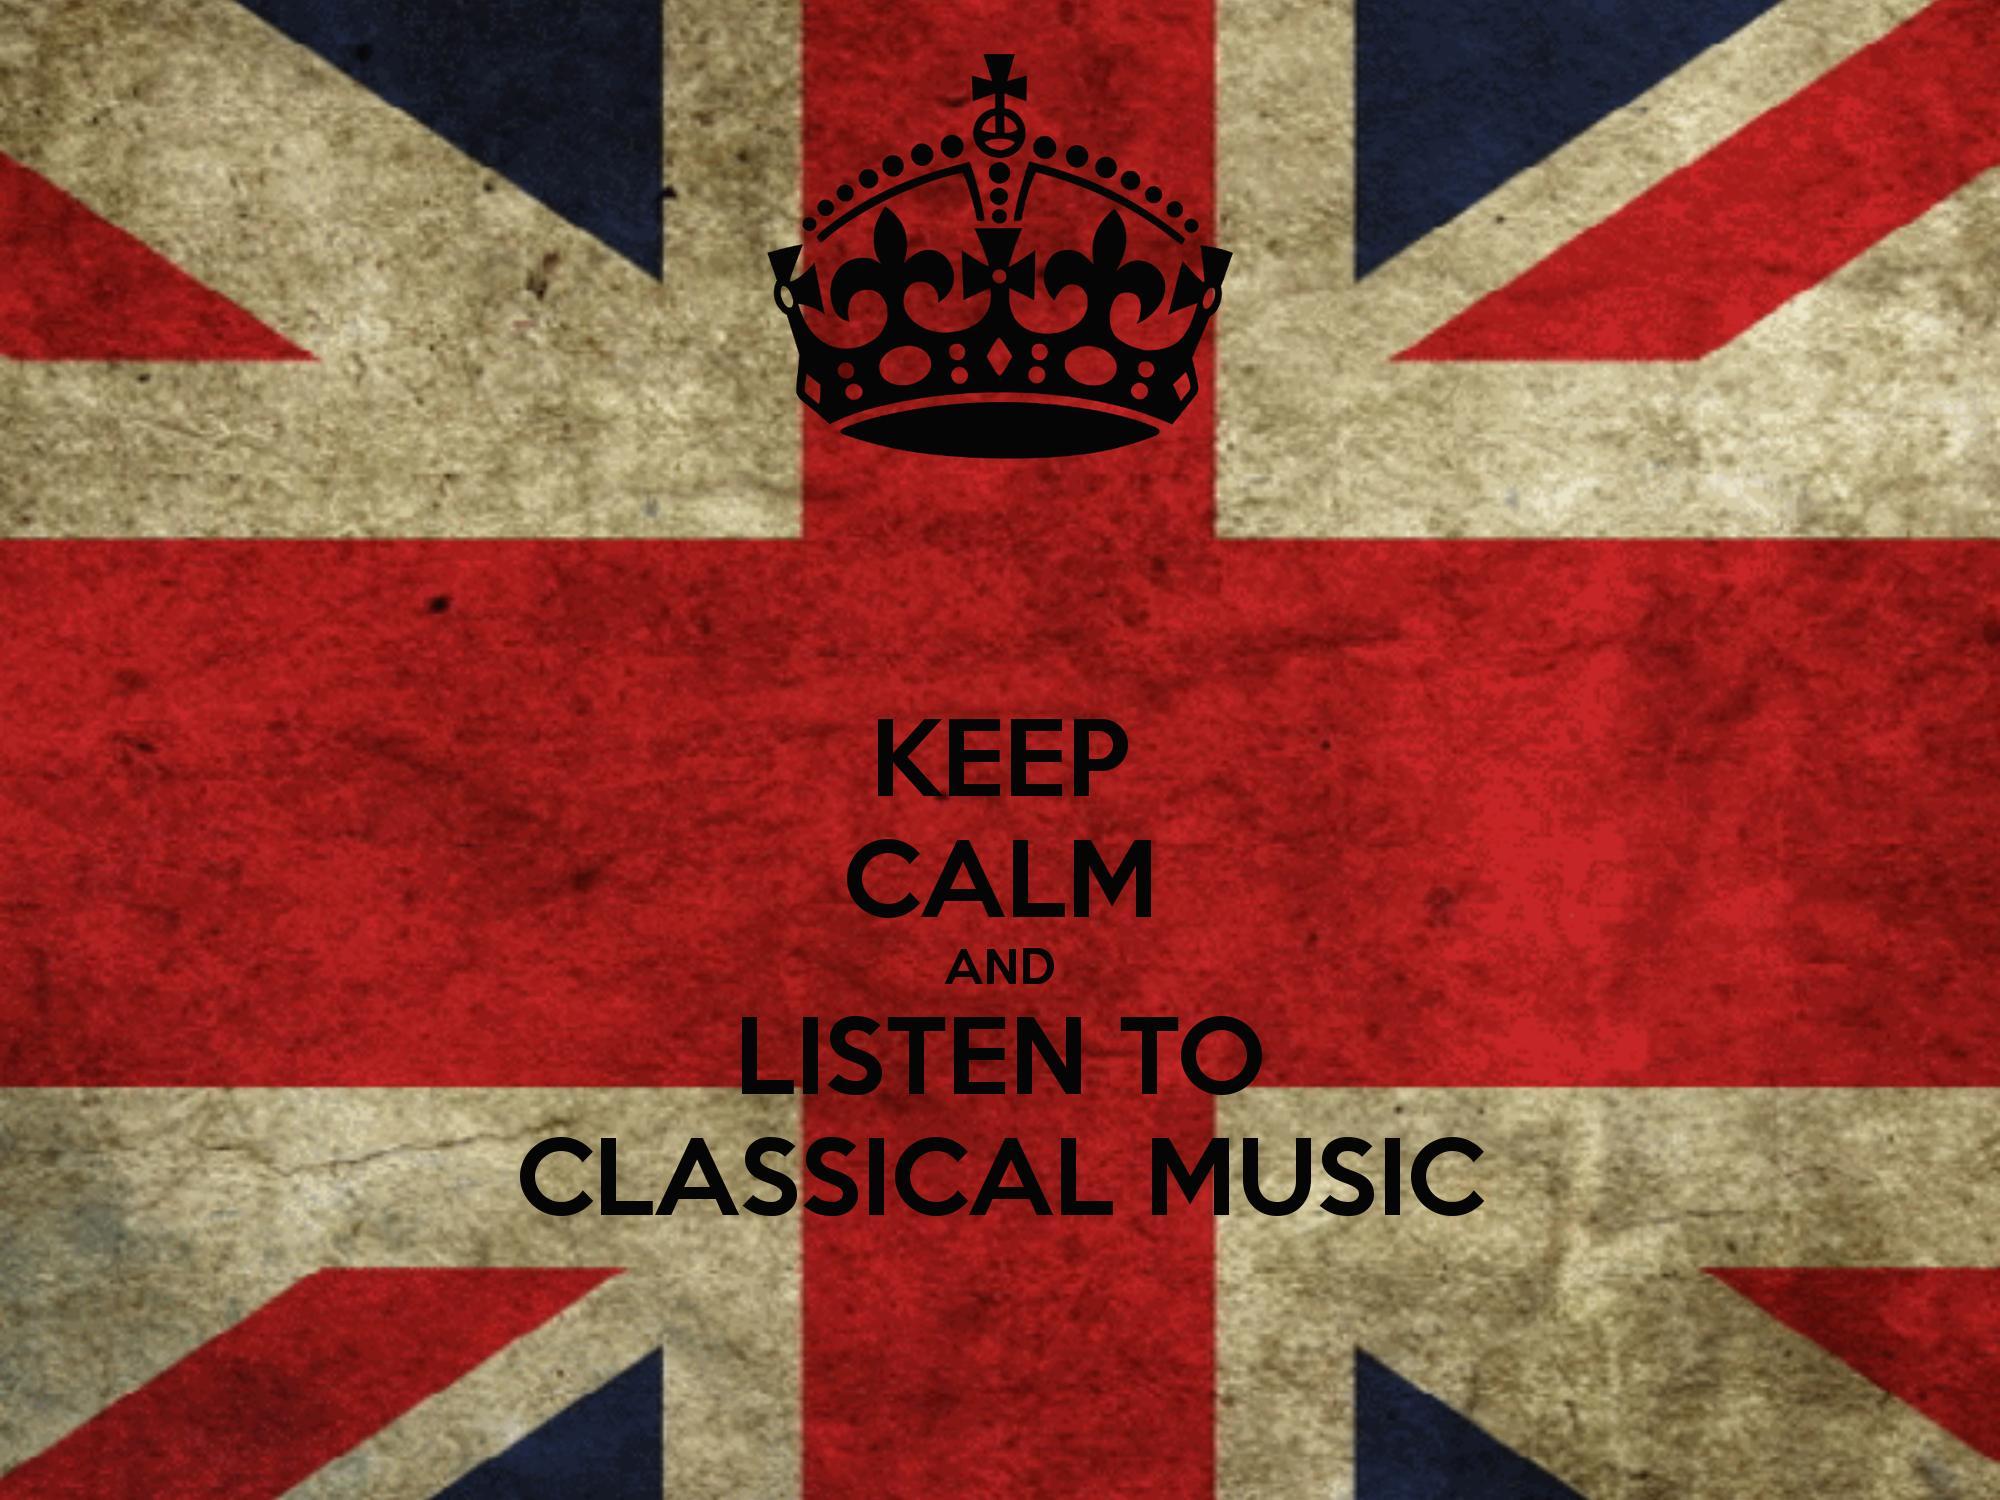 KEEP CALM AND LISTEN TO CLASSICAL MUSIC CALM AND CARRY ON